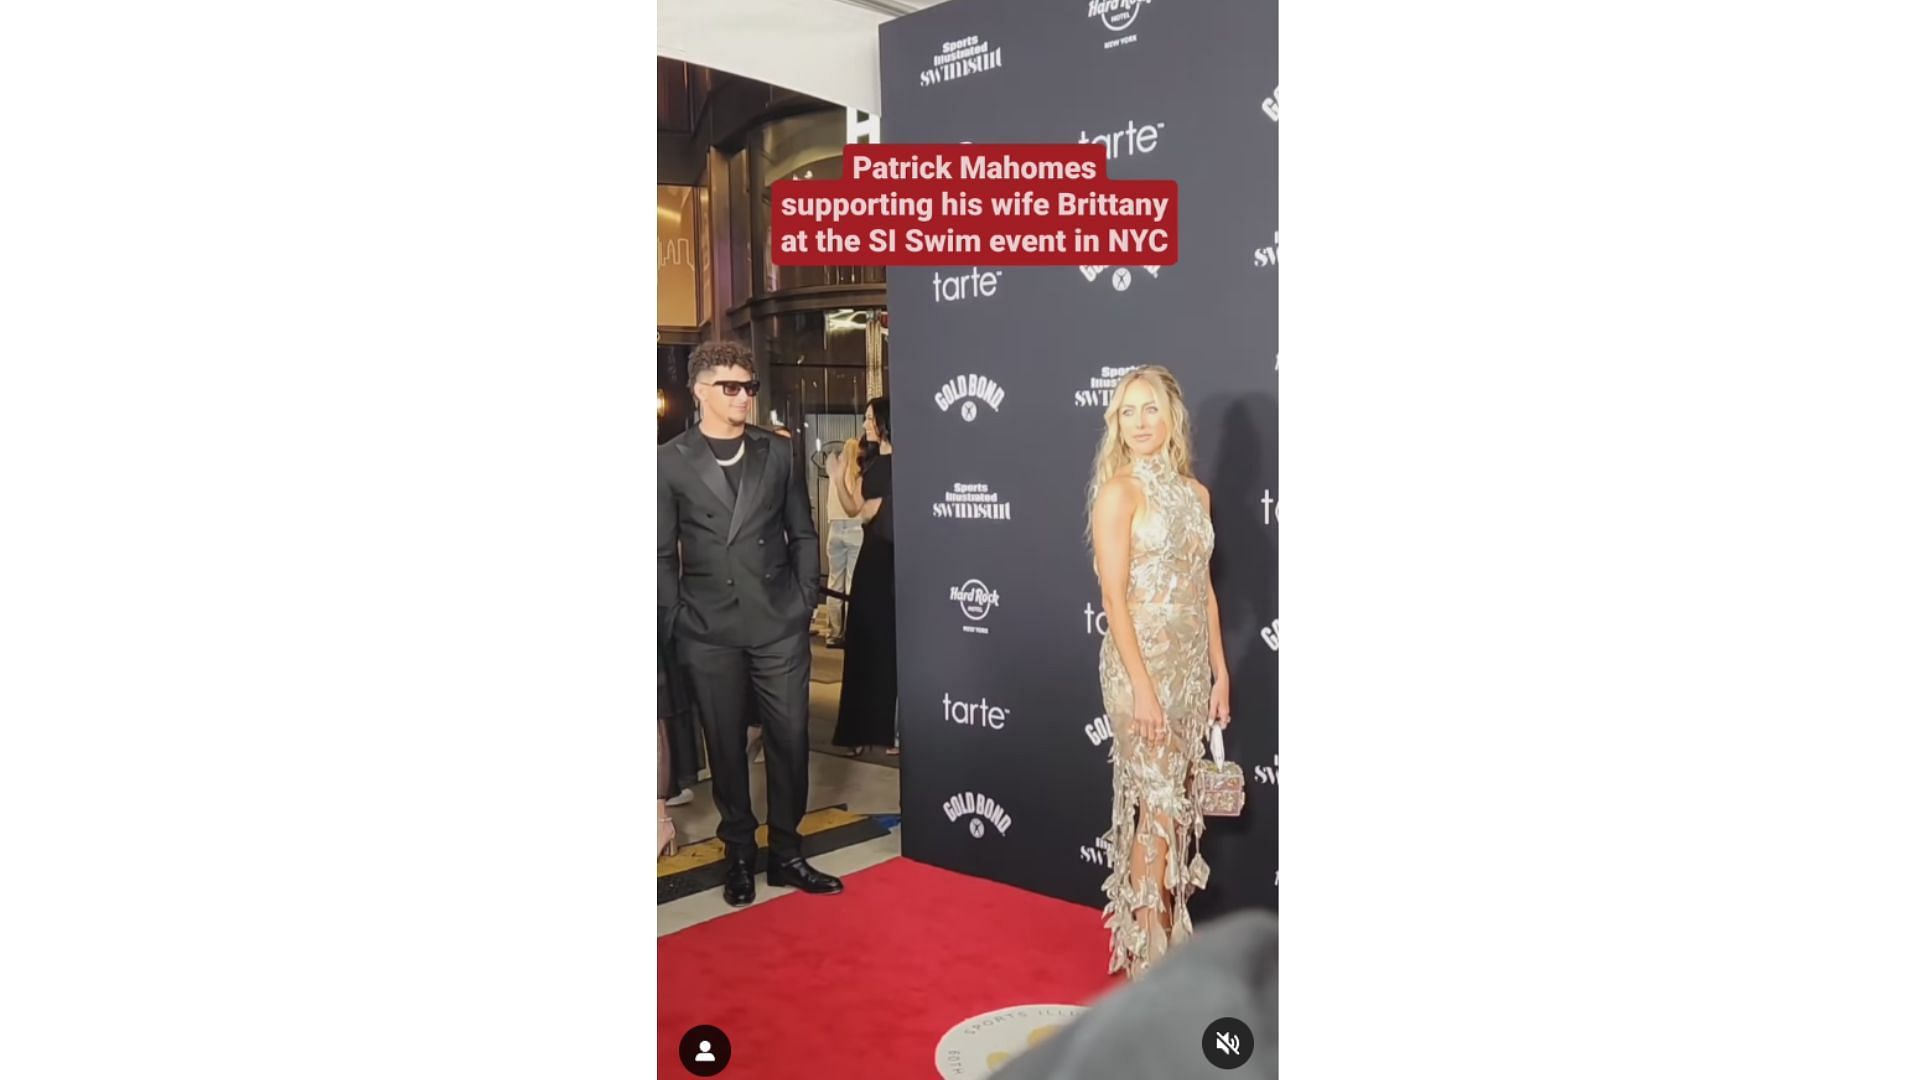 Patrick Mahomes and Brittany at the SI Swimsuit red carpet (From @patrickmahomes)